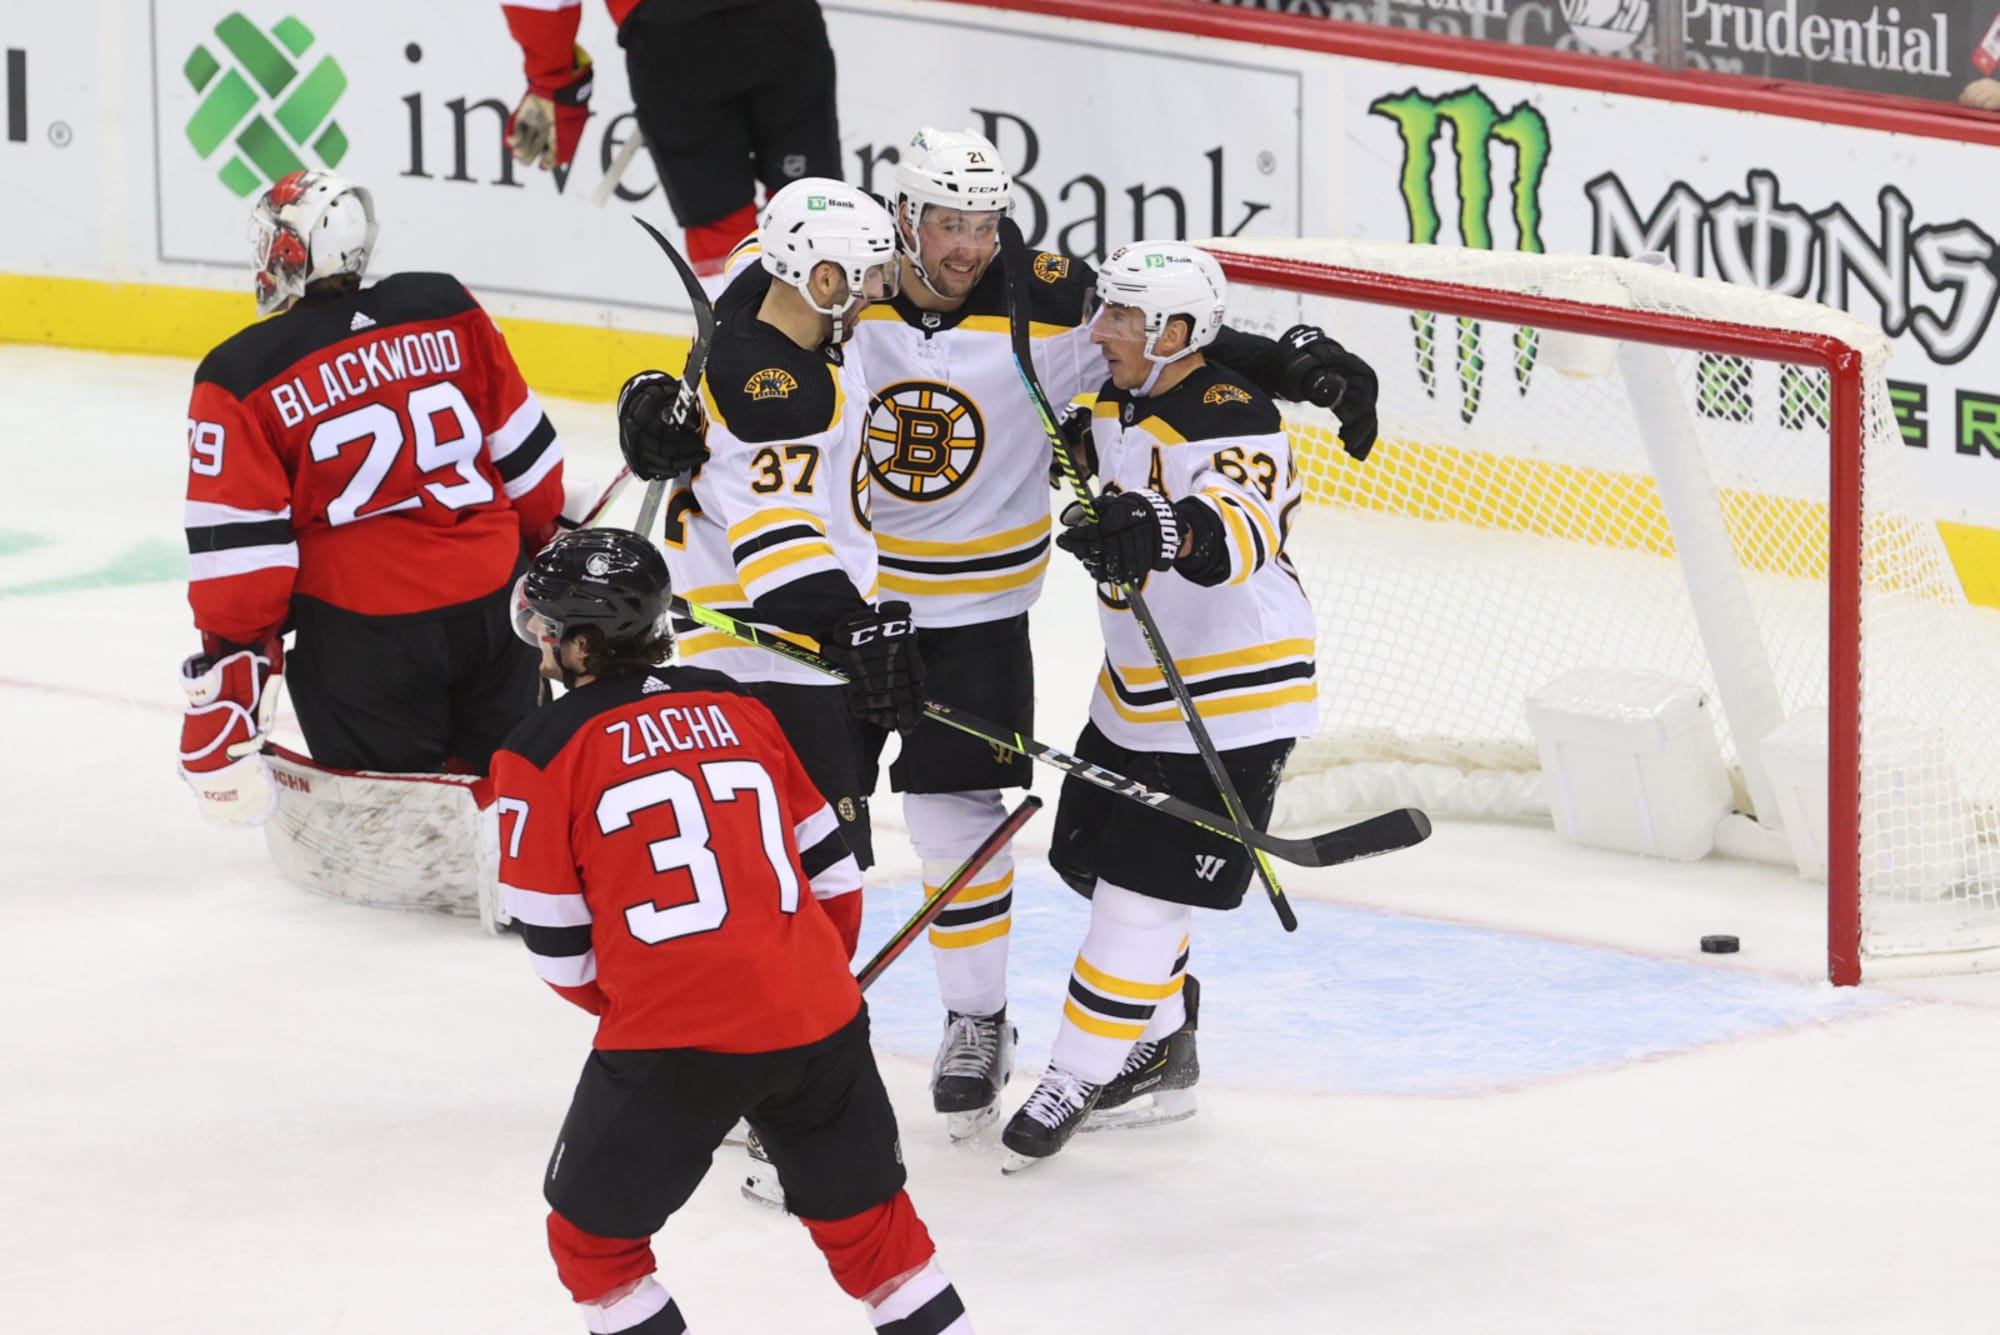 3 takeaways from the Bruins' 4-3 win against the Devils